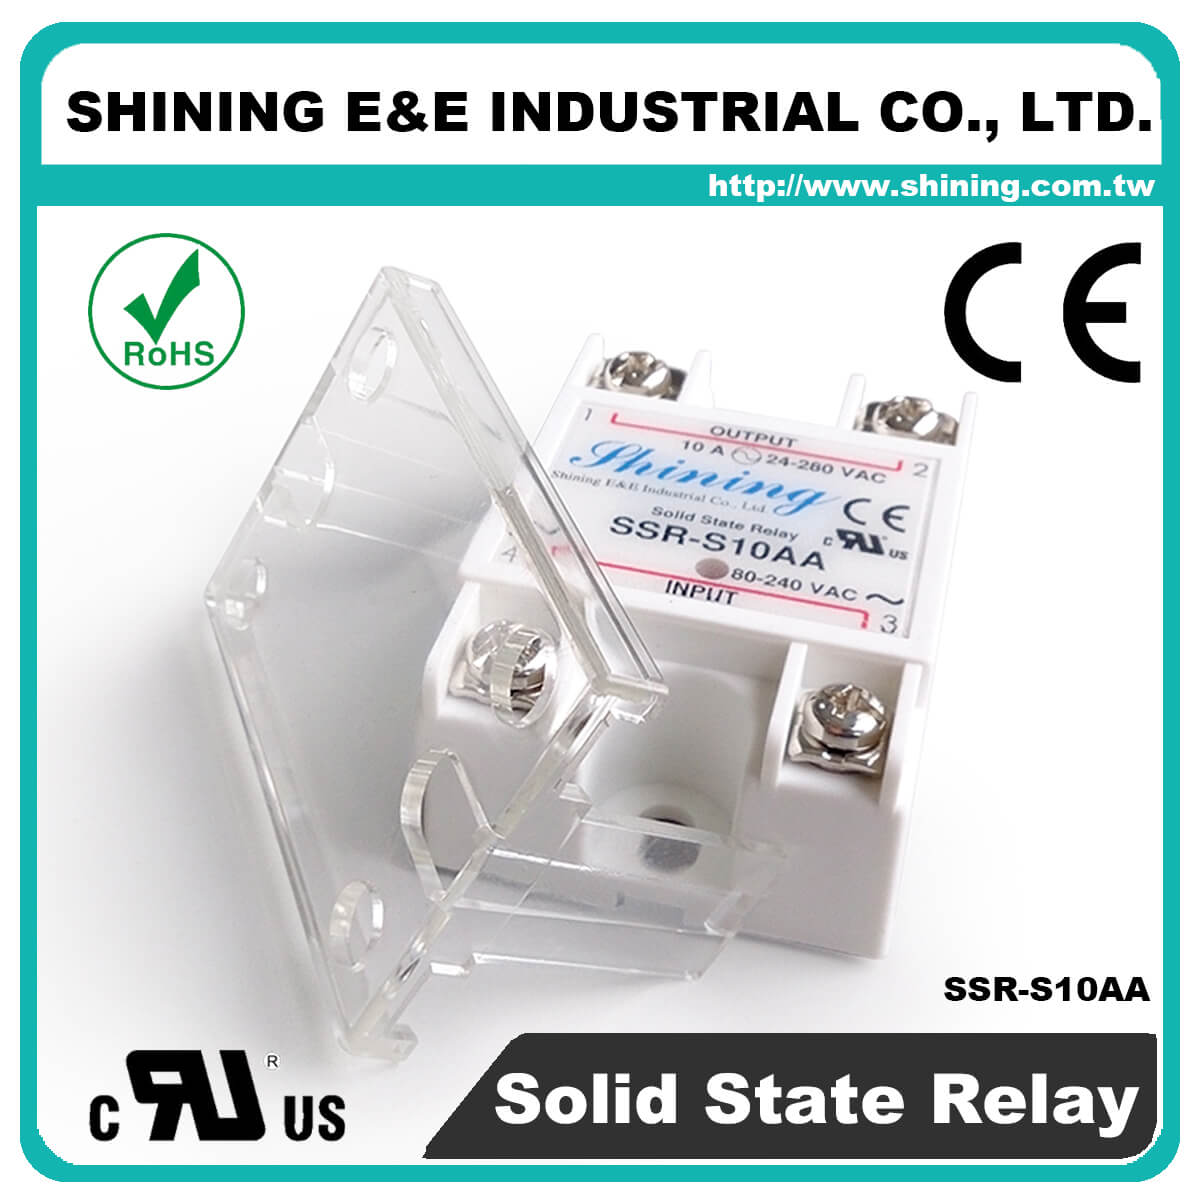 SSR-S10AA AC to AC 10A 280VAC Single Phase Solid State Relay